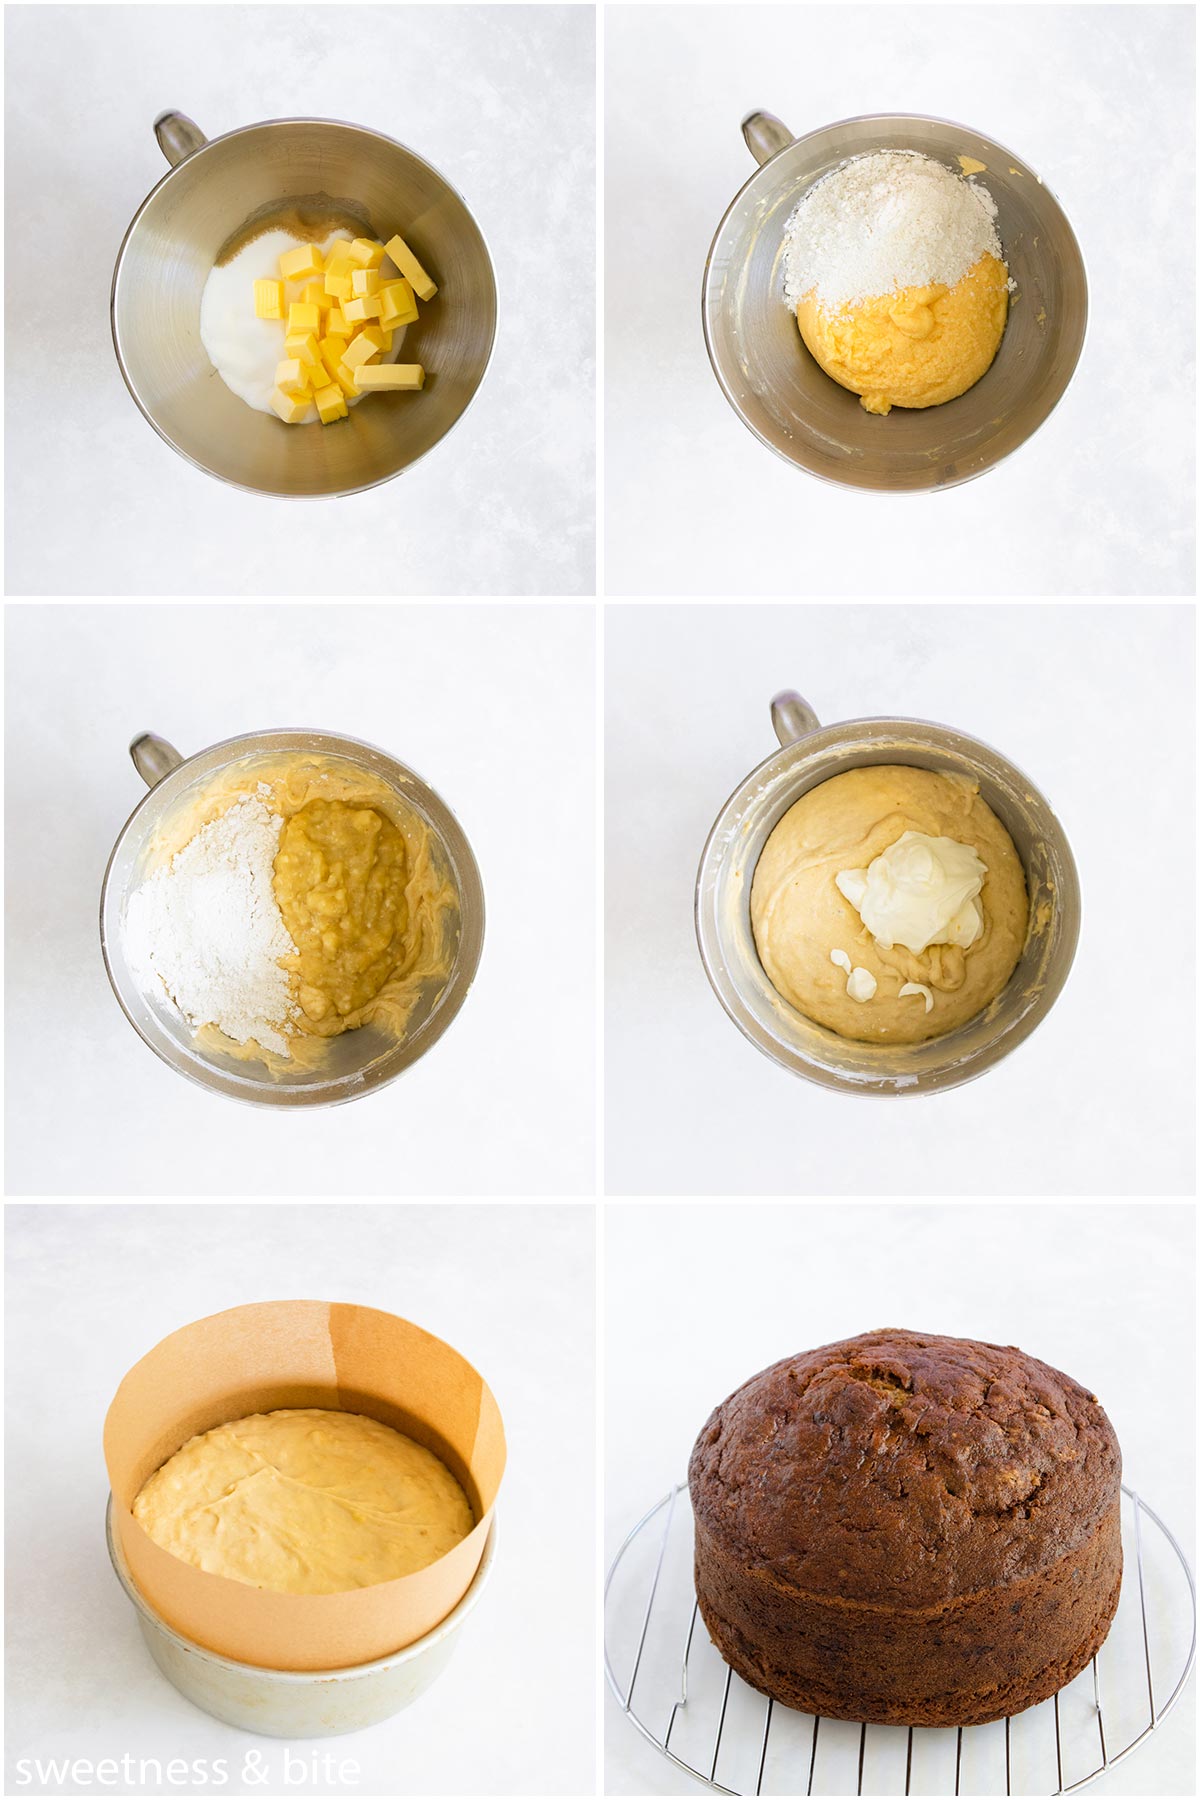 A collage of six images showing the steps of mixing the cake batter, and the baked banana cake.